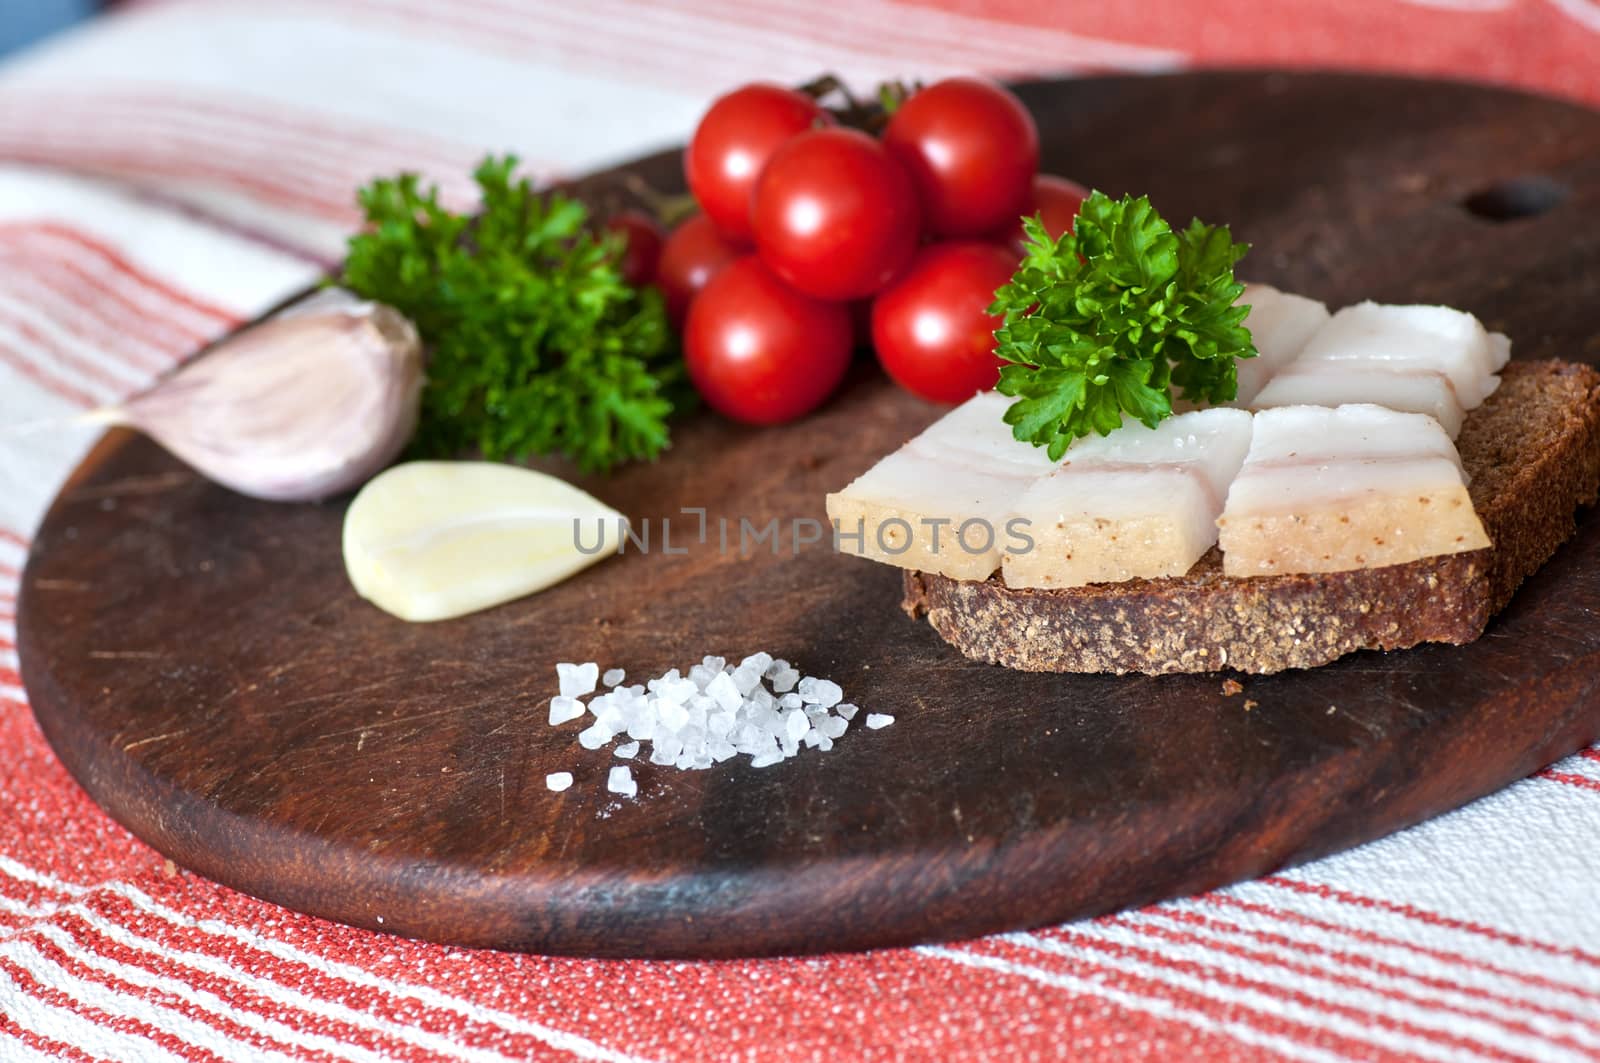 Sandwich made of salted lard on rye bread, served with garlic, cherry tomatoes and parsley